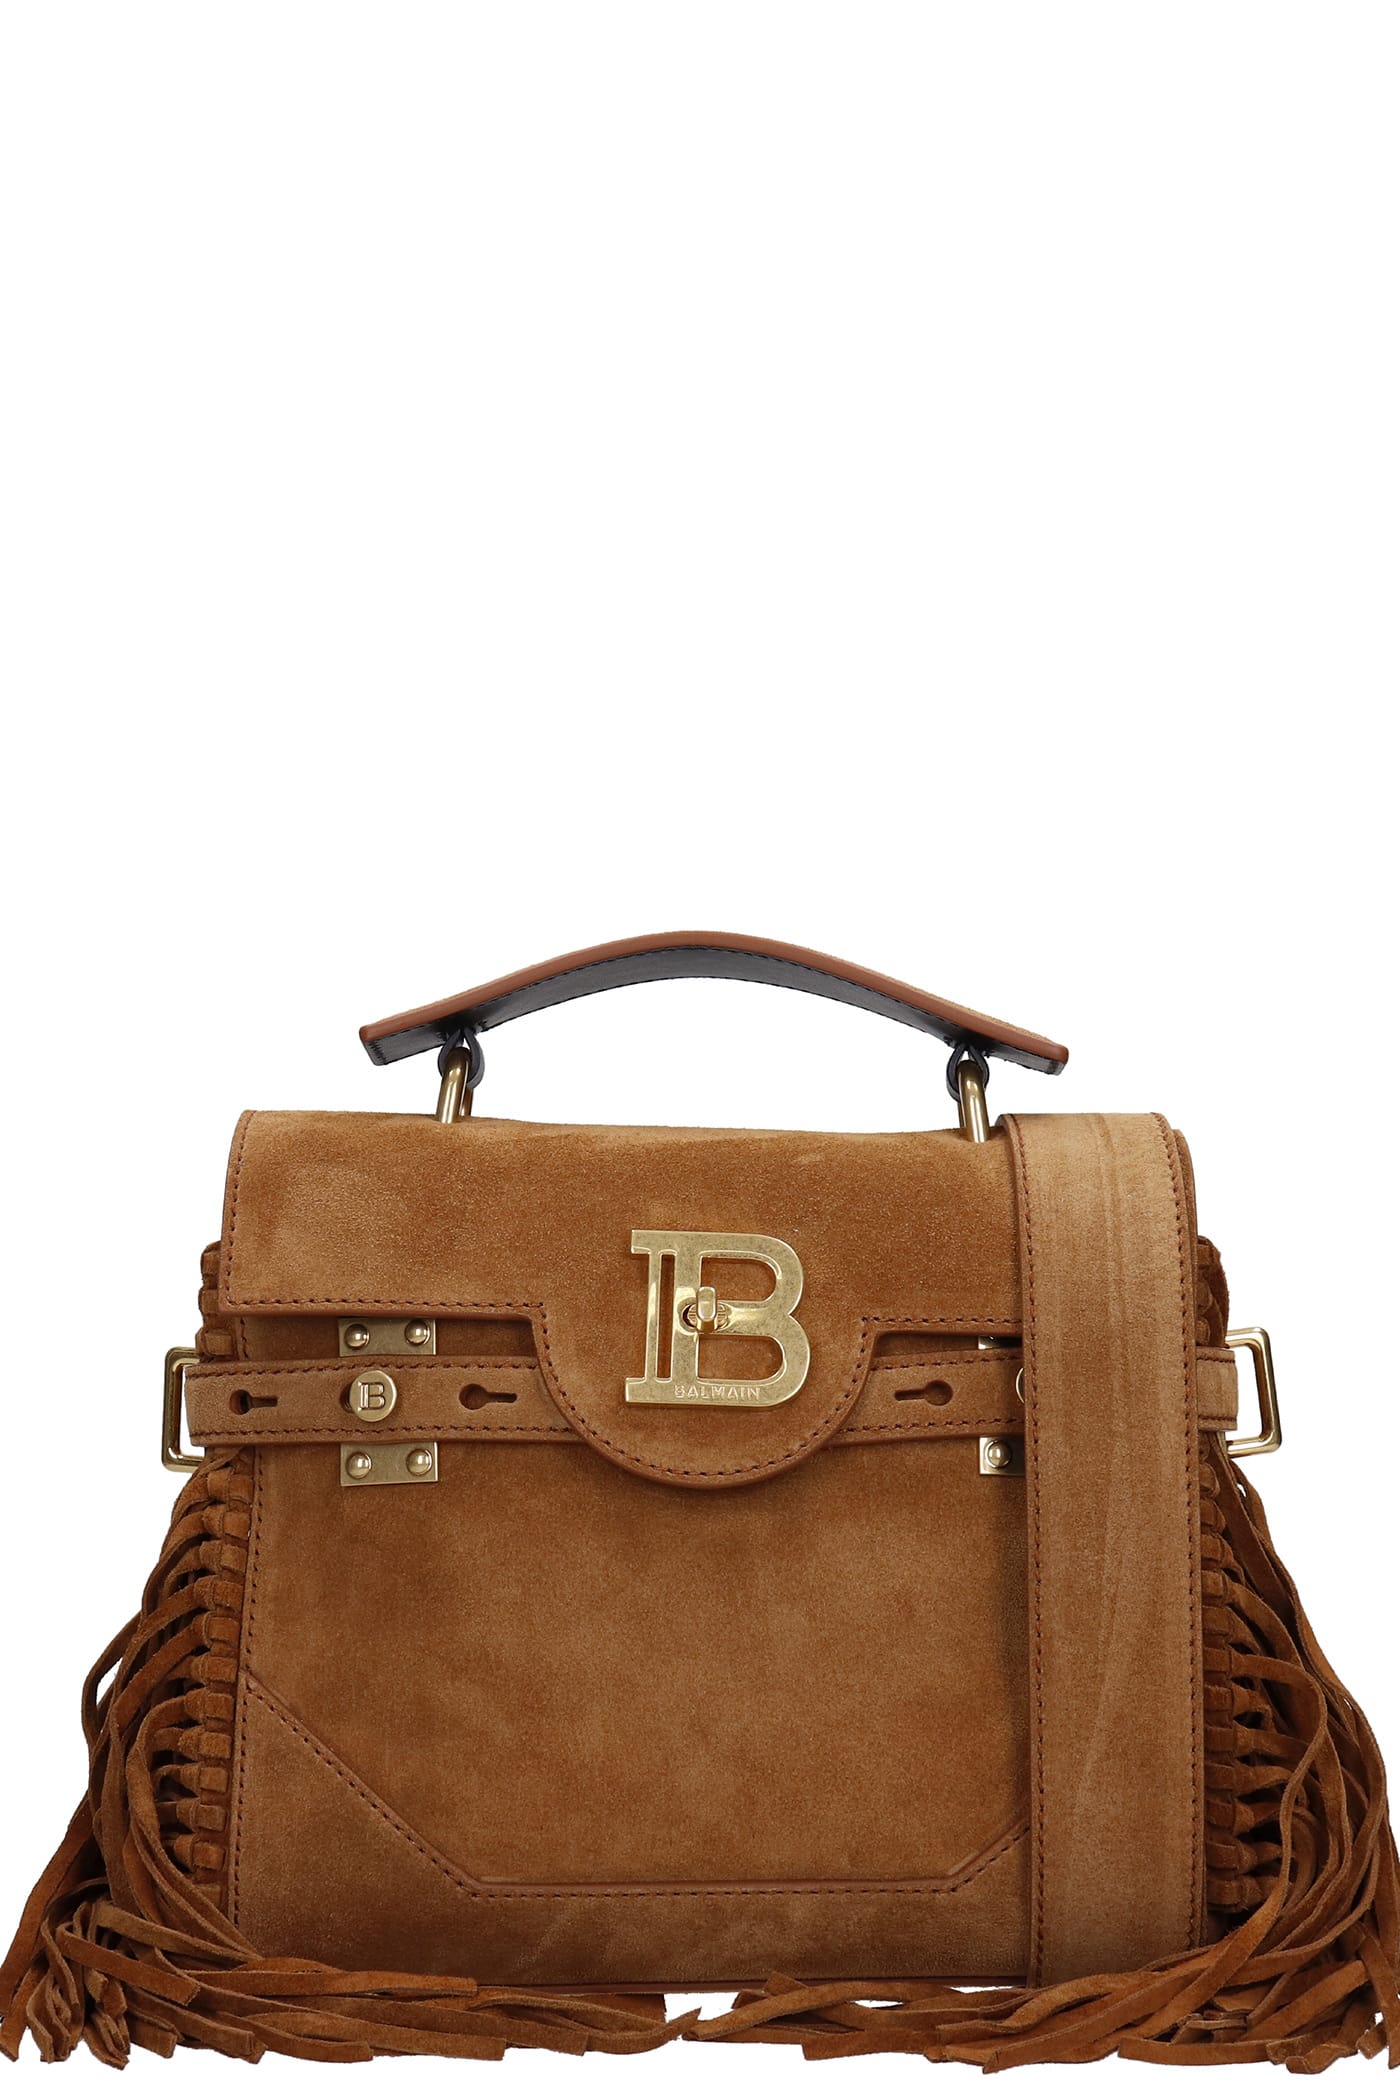 Balmain B-buzz23 Hand Bag In Leather Color Suede And Leather